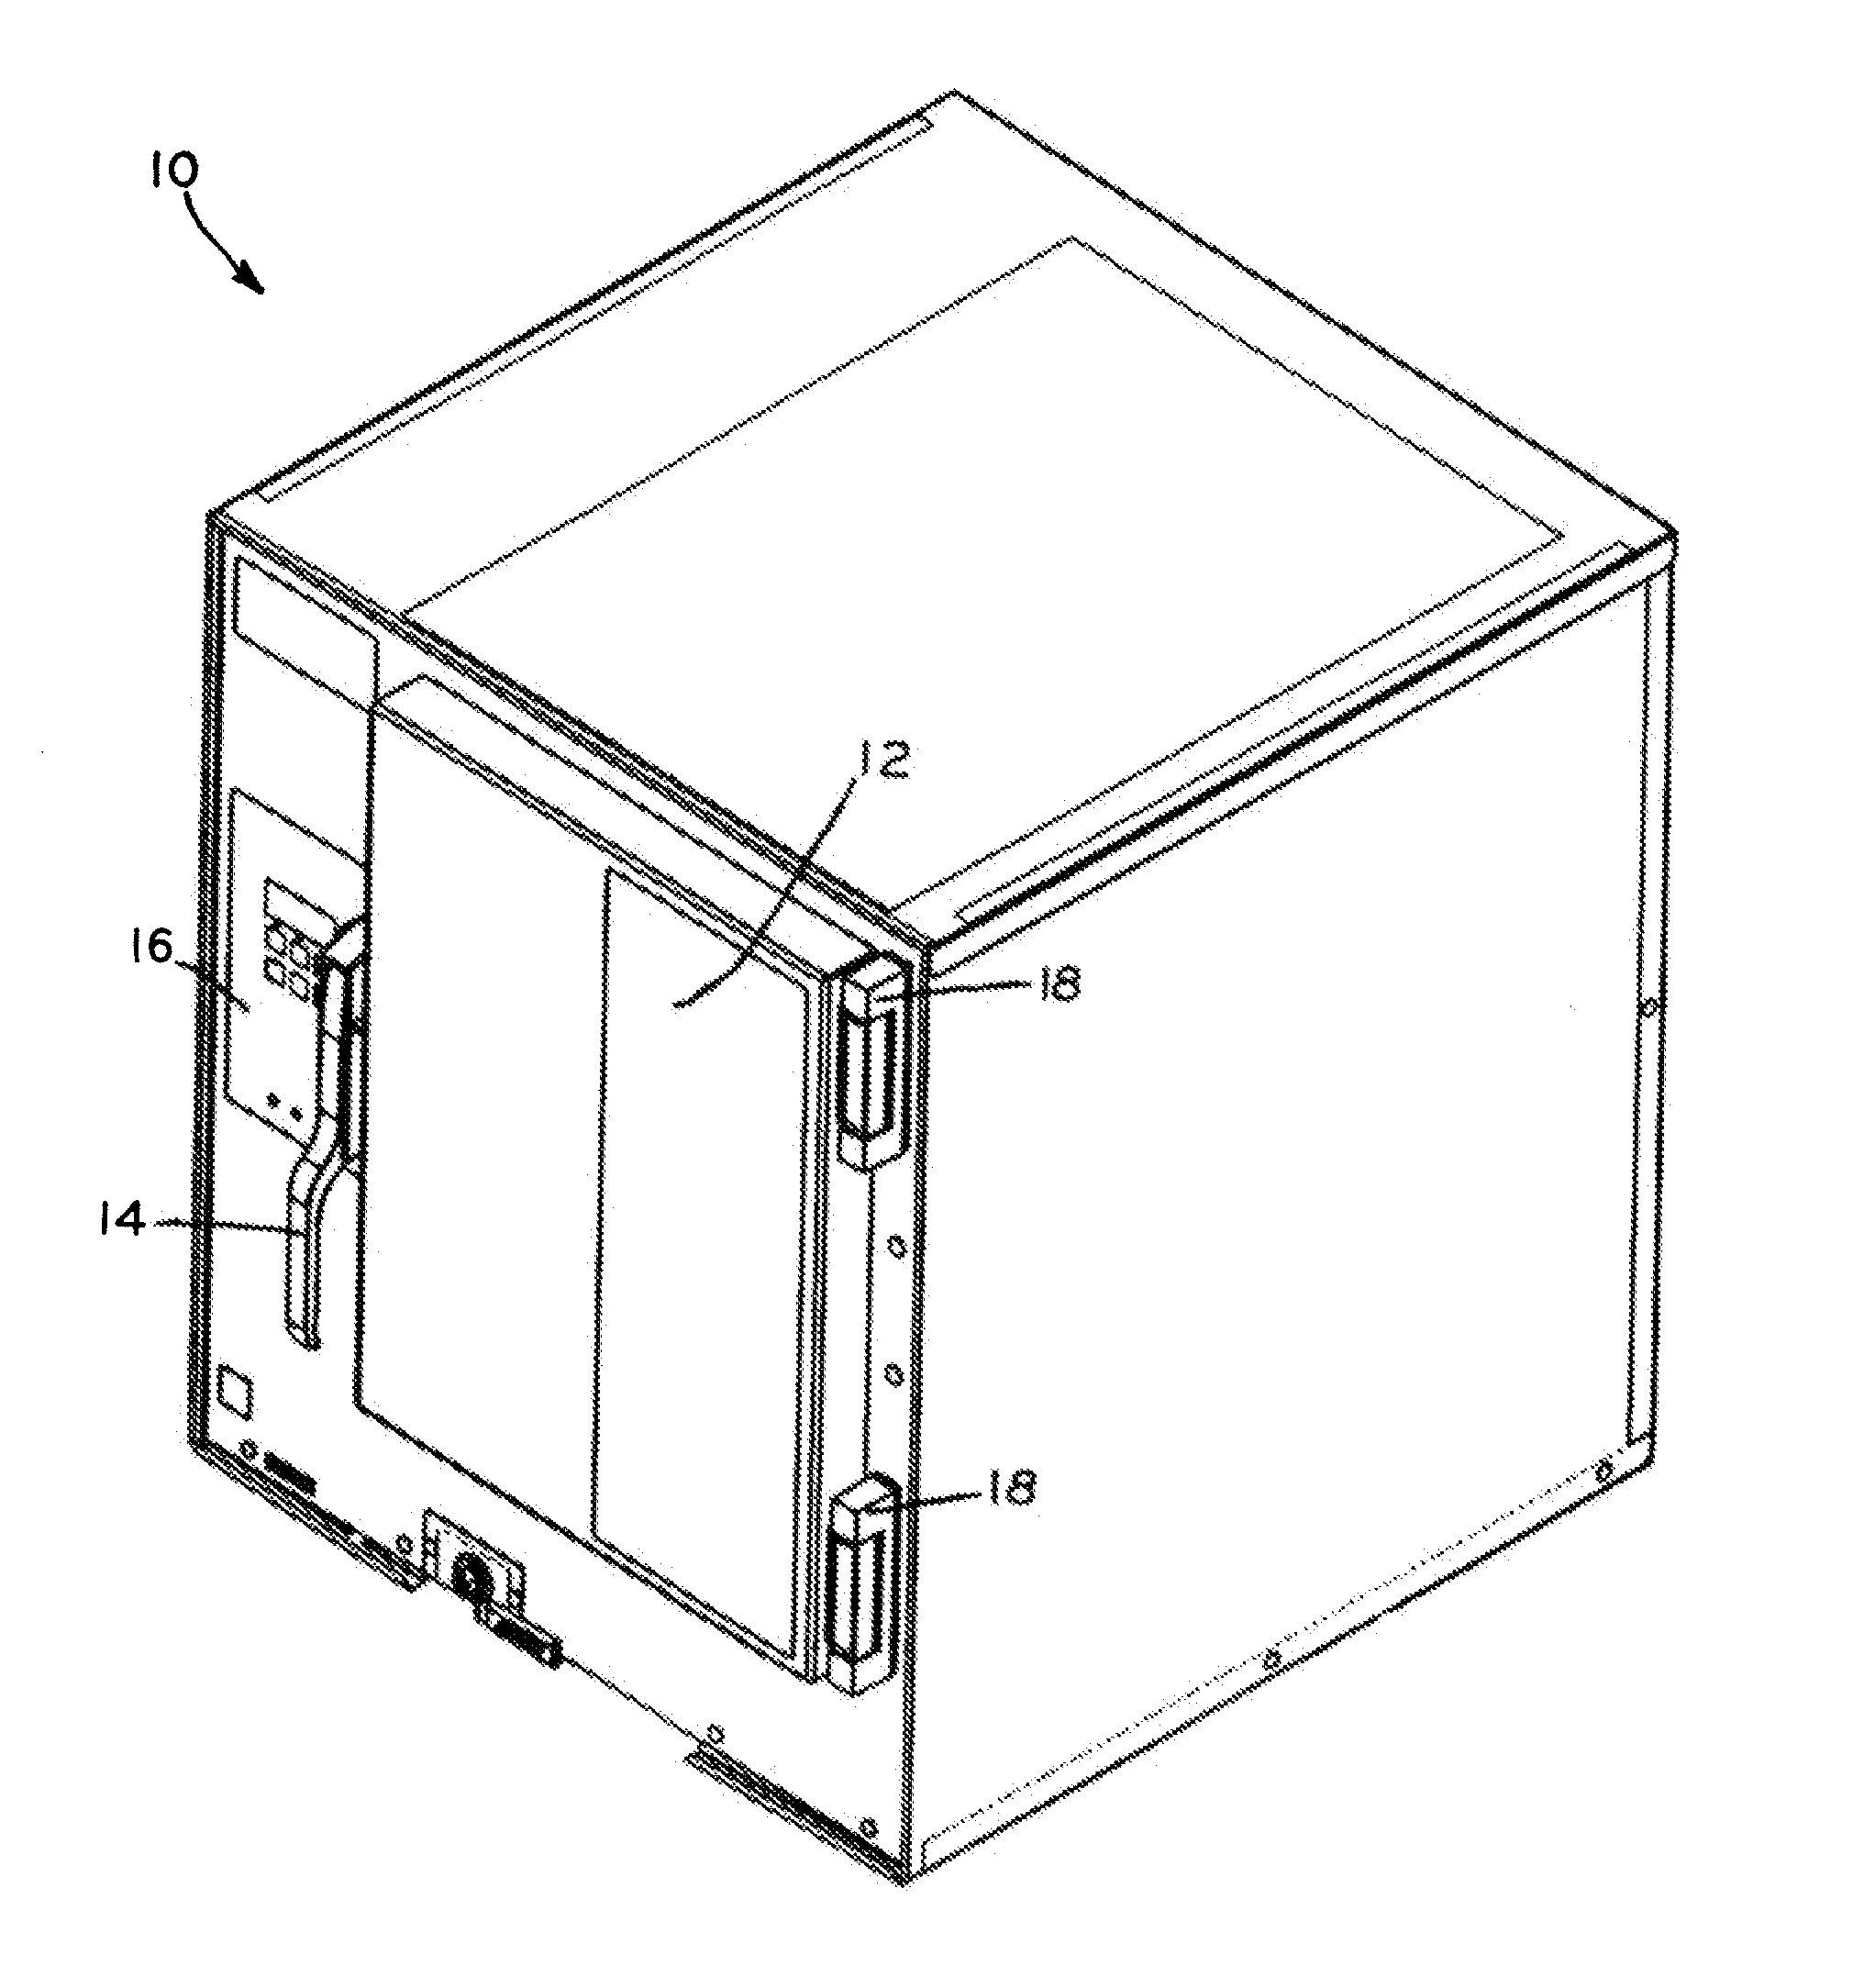 Method and apparatus for directing steam distribution in a steam cooker